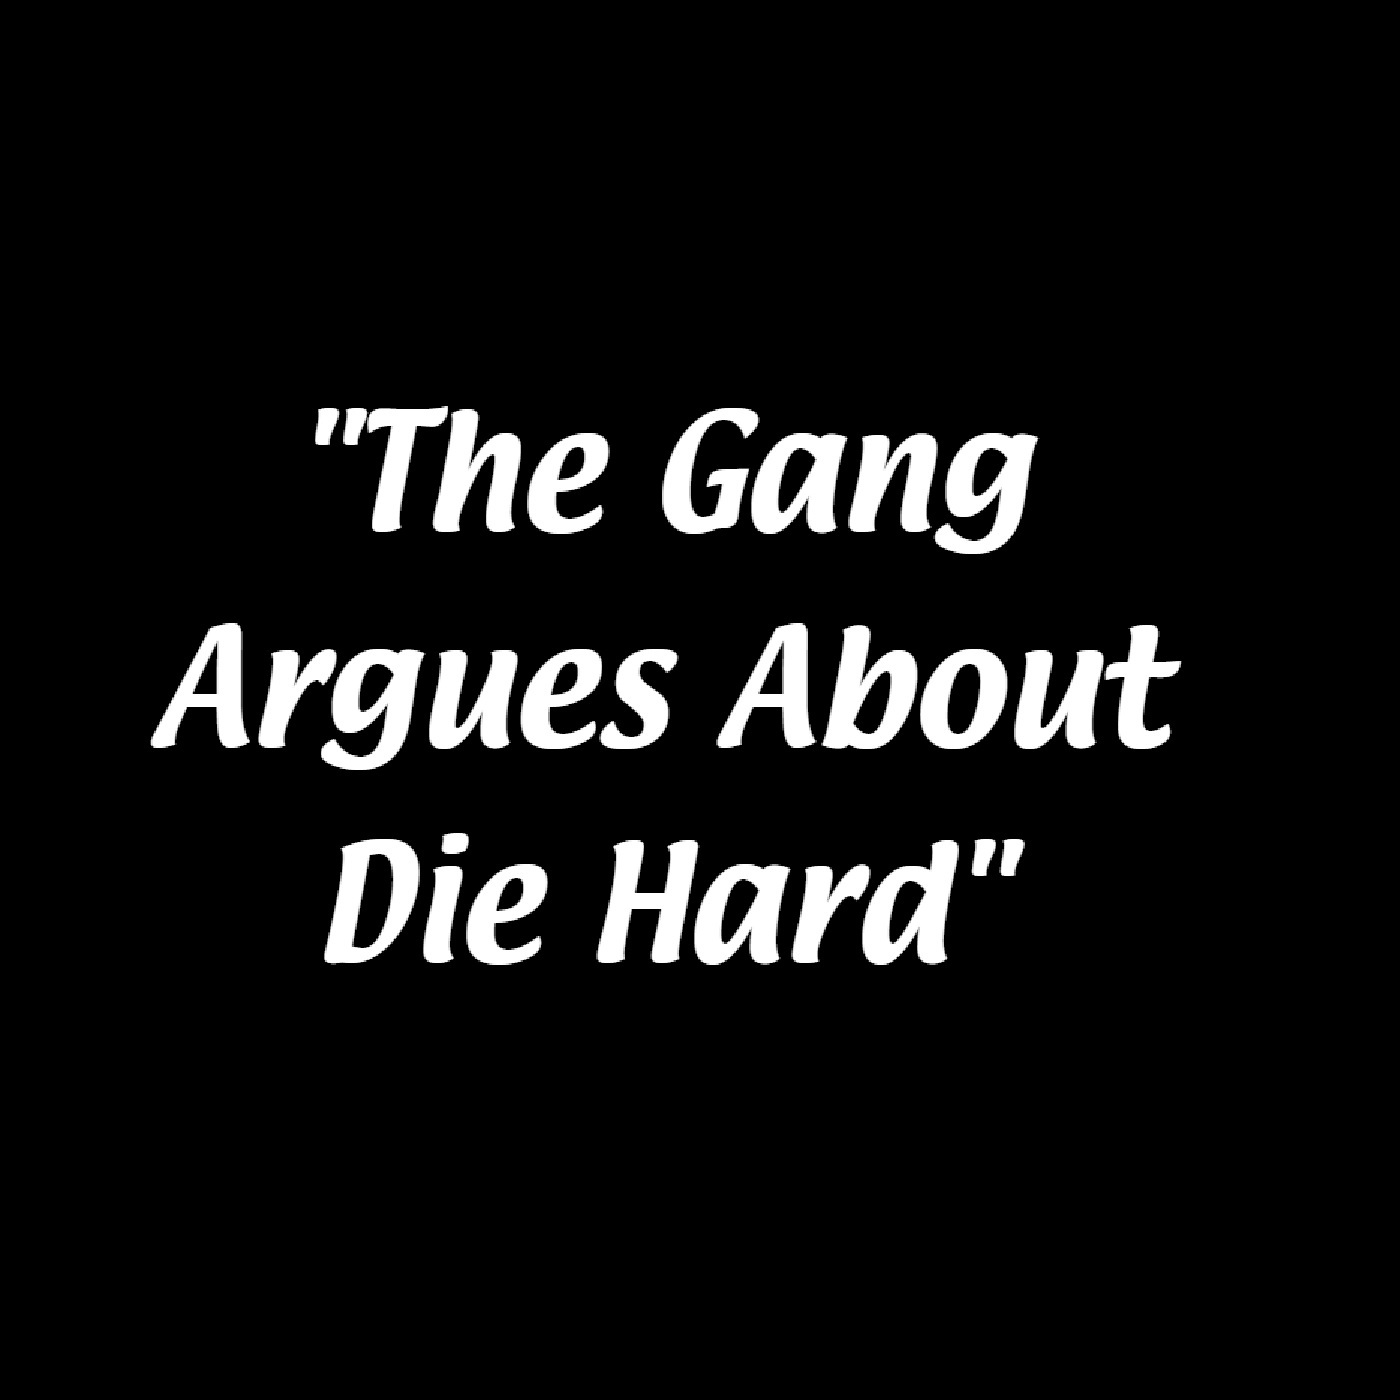 Episode 84 - The Gang Argues About Die Hard